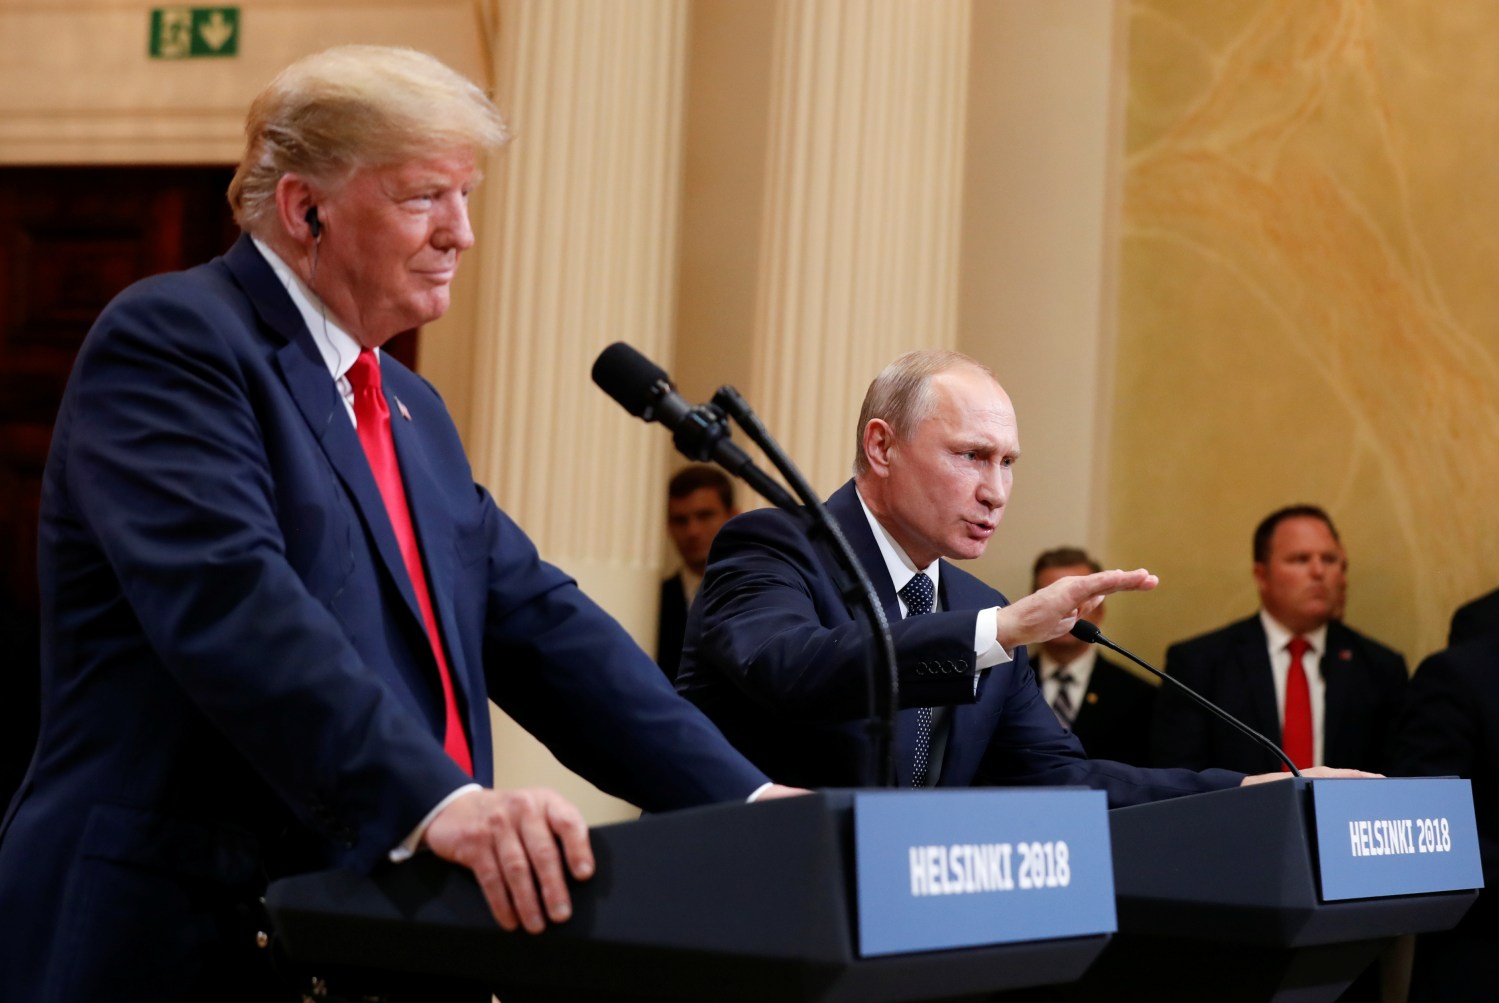 Russia's President Vladimir Putin gestures during a joint news conference with U.S. President Donald Trump after their meeting in Helsinki, Finland, July 16, 2018. REUTERS/Kevin Lamarque - RC1308EDF9C0